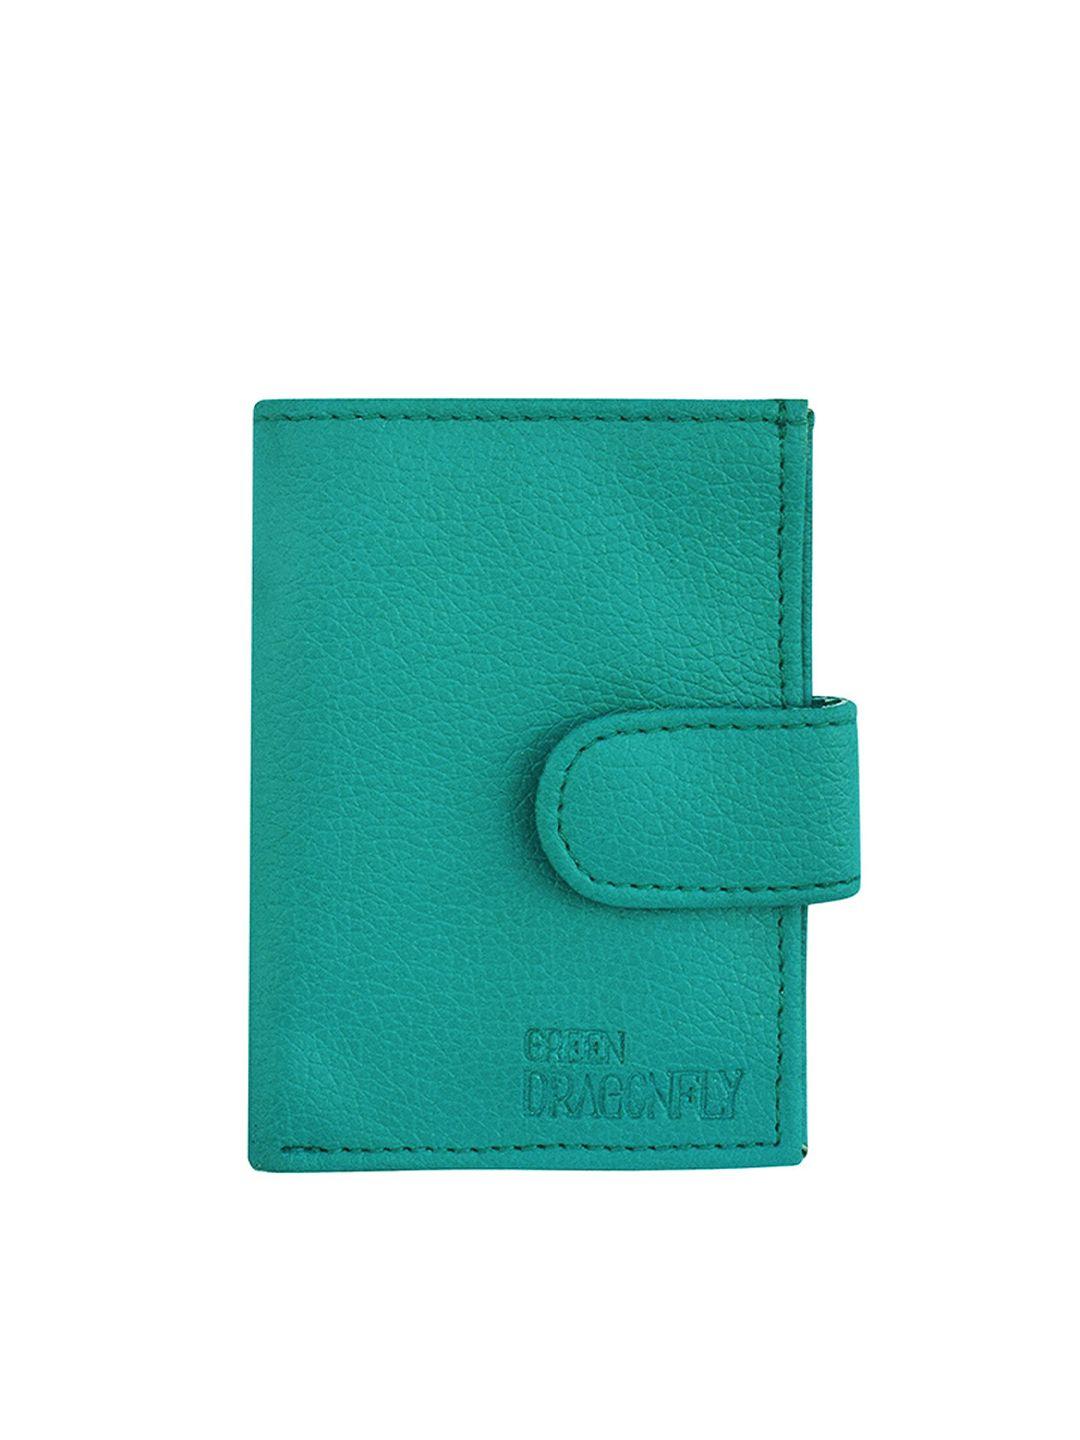 green dragonfly textured card holder